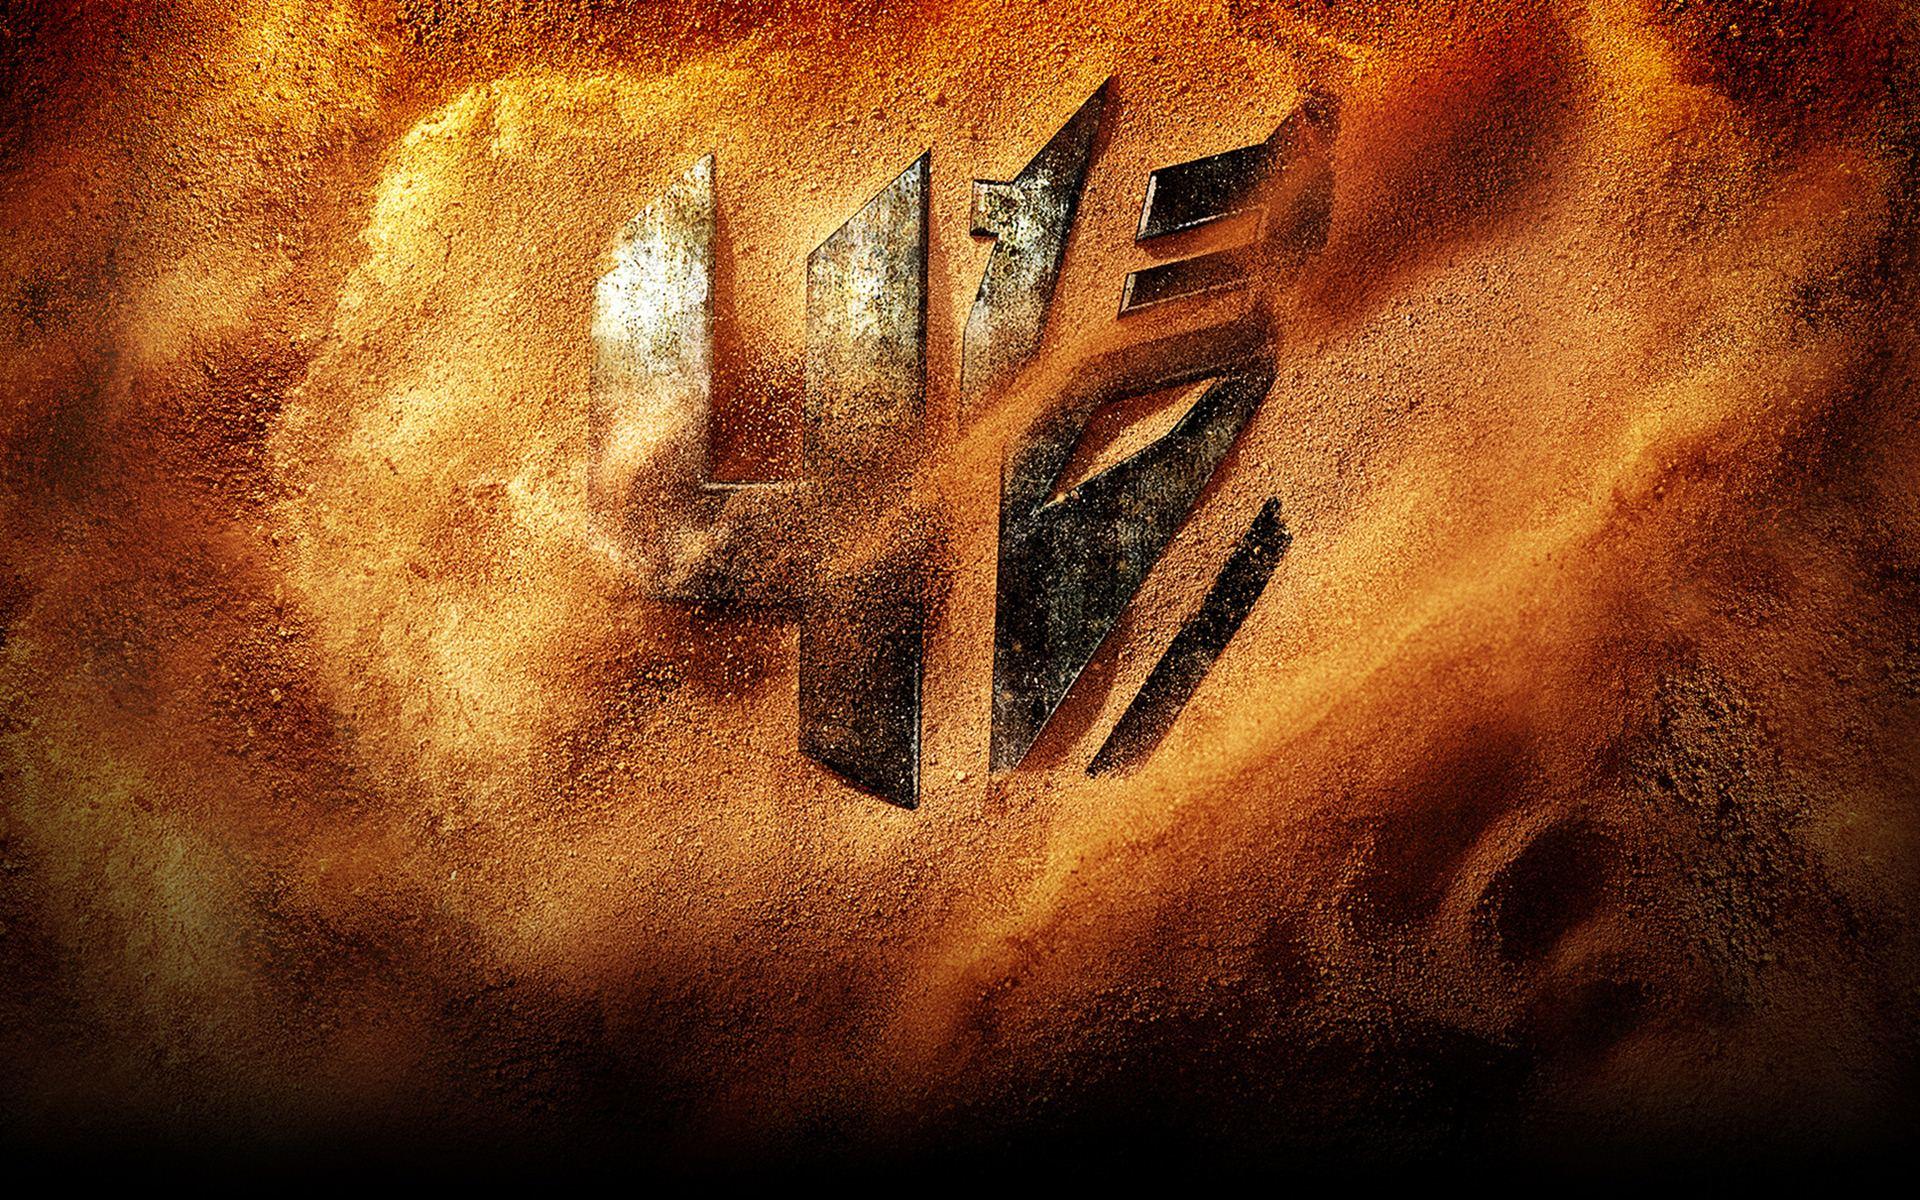 Breathtaking HD Wallpaper of Transformers: Age of Extinction